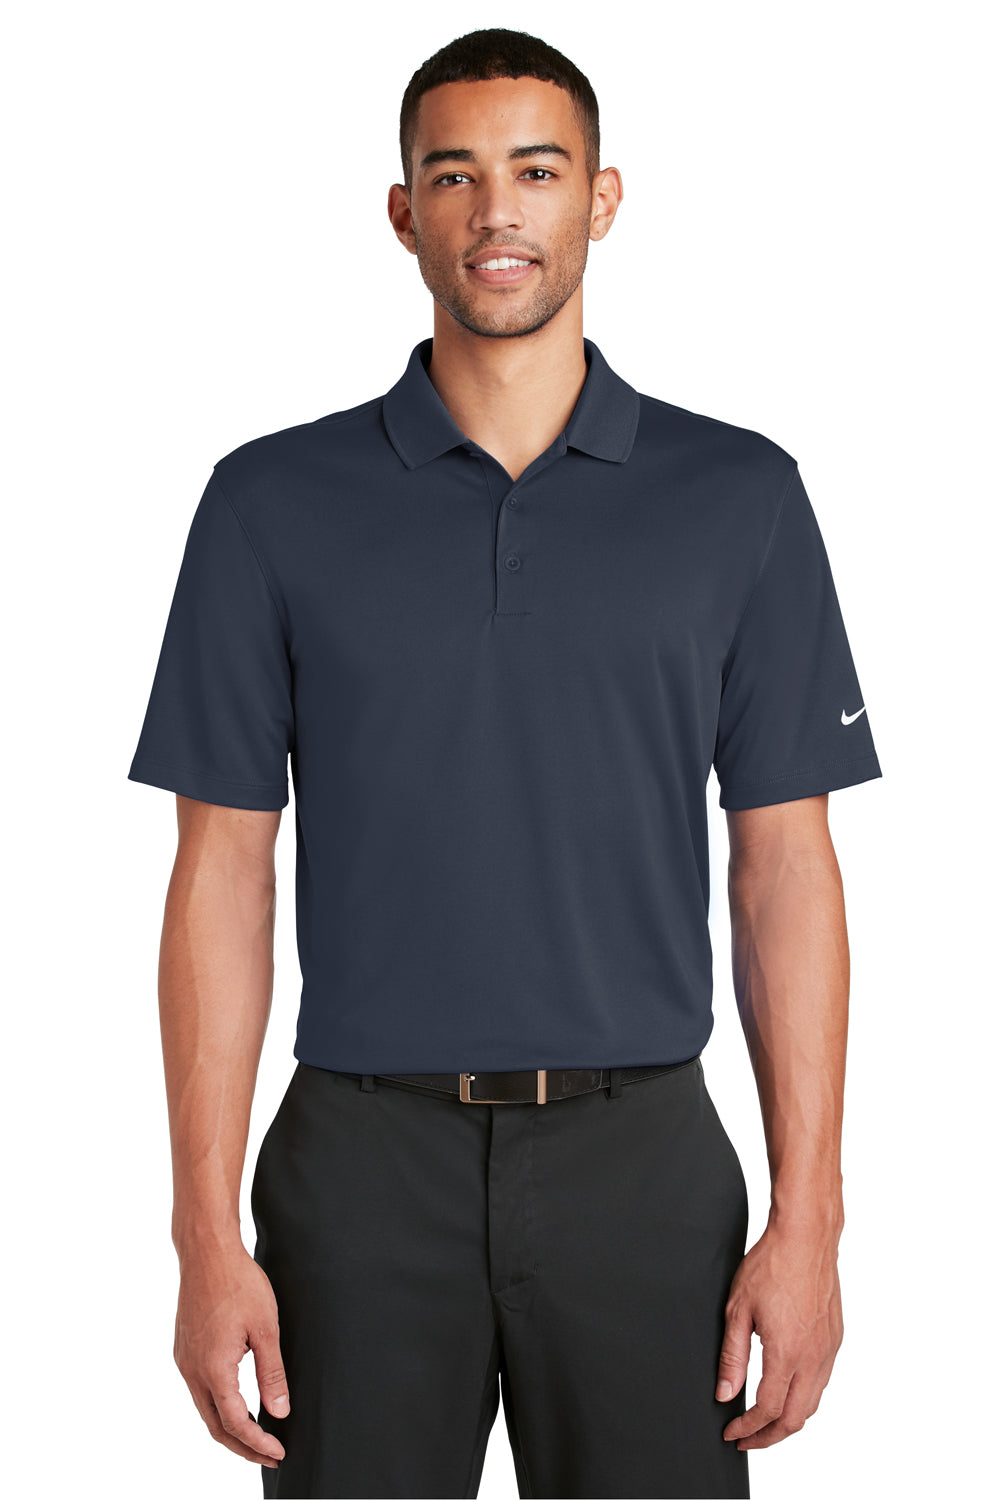 Nike 838956 Mens Players Dri-Fit Moisture Wicking Short Sleeve Polo Shirt Navy Blue Model Front